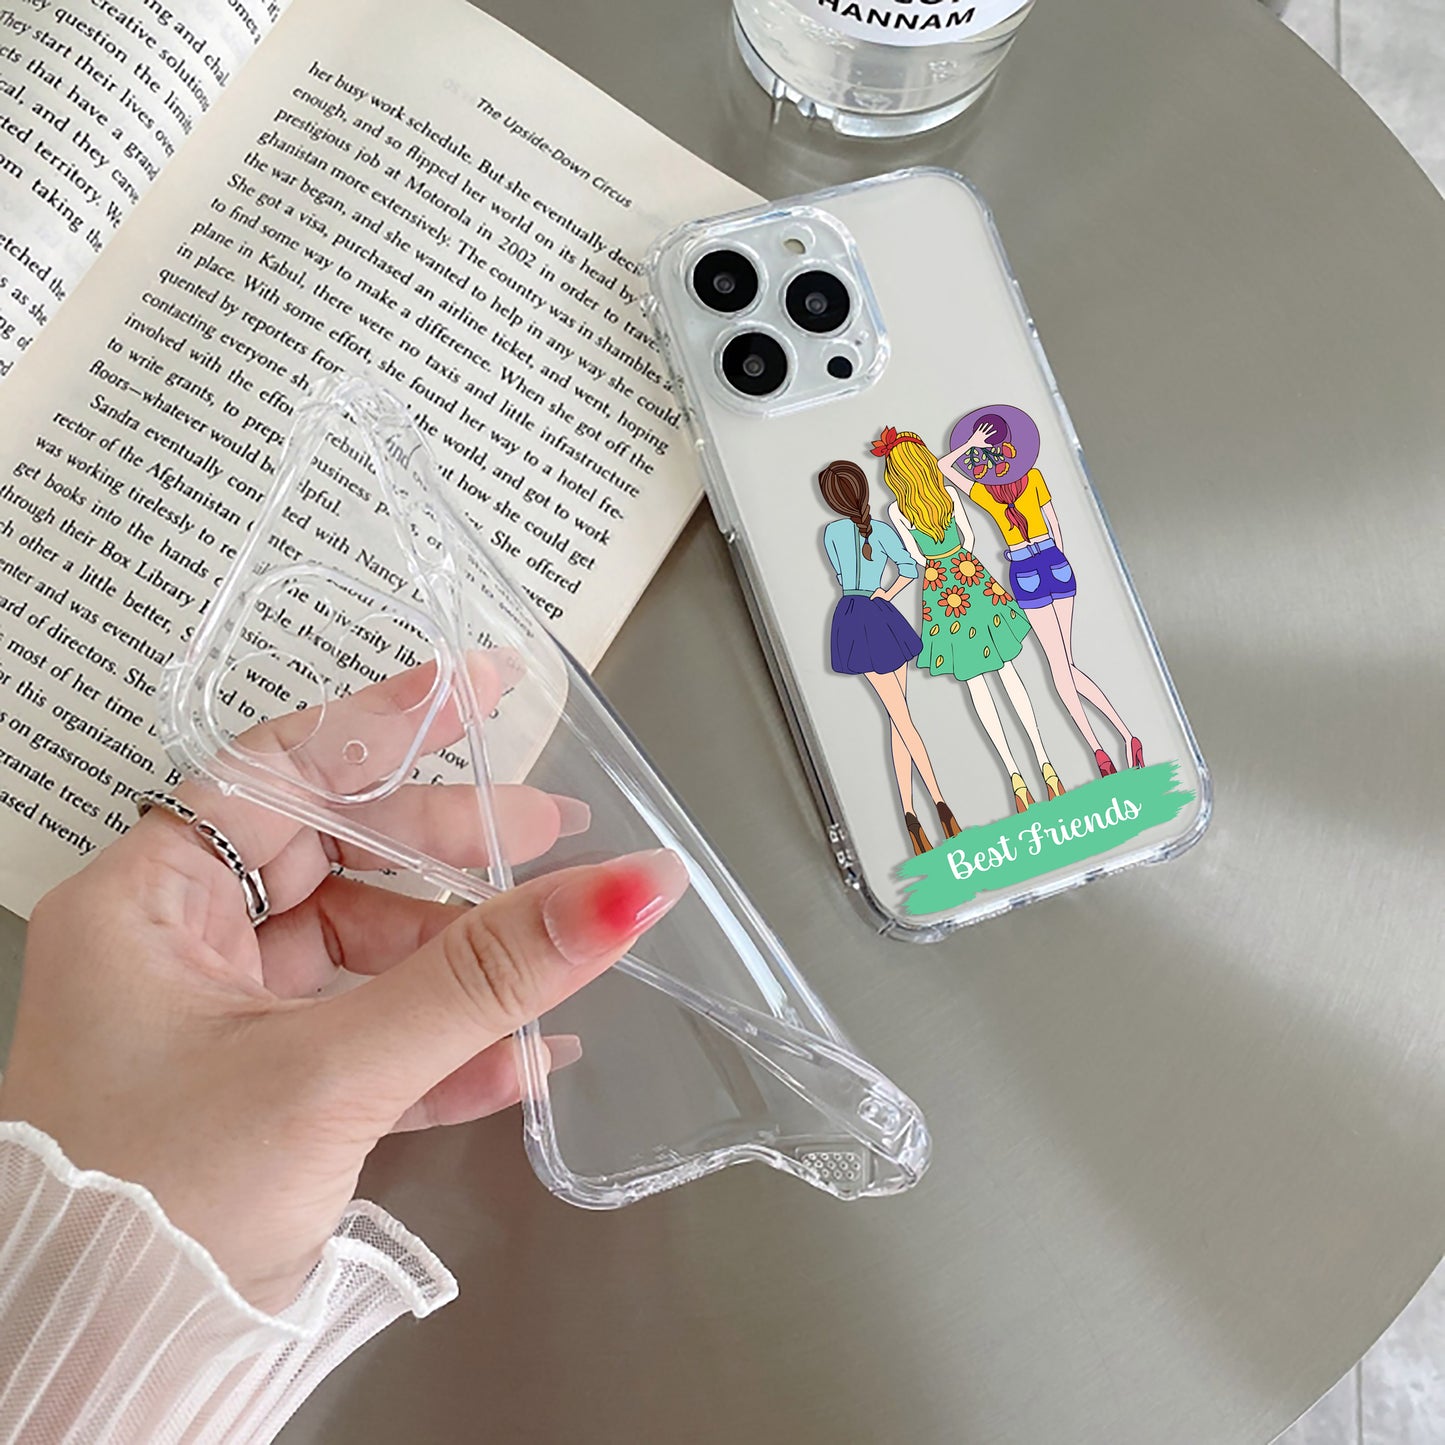 Friends Forever Customize Transparent Silicon Case For iPhone